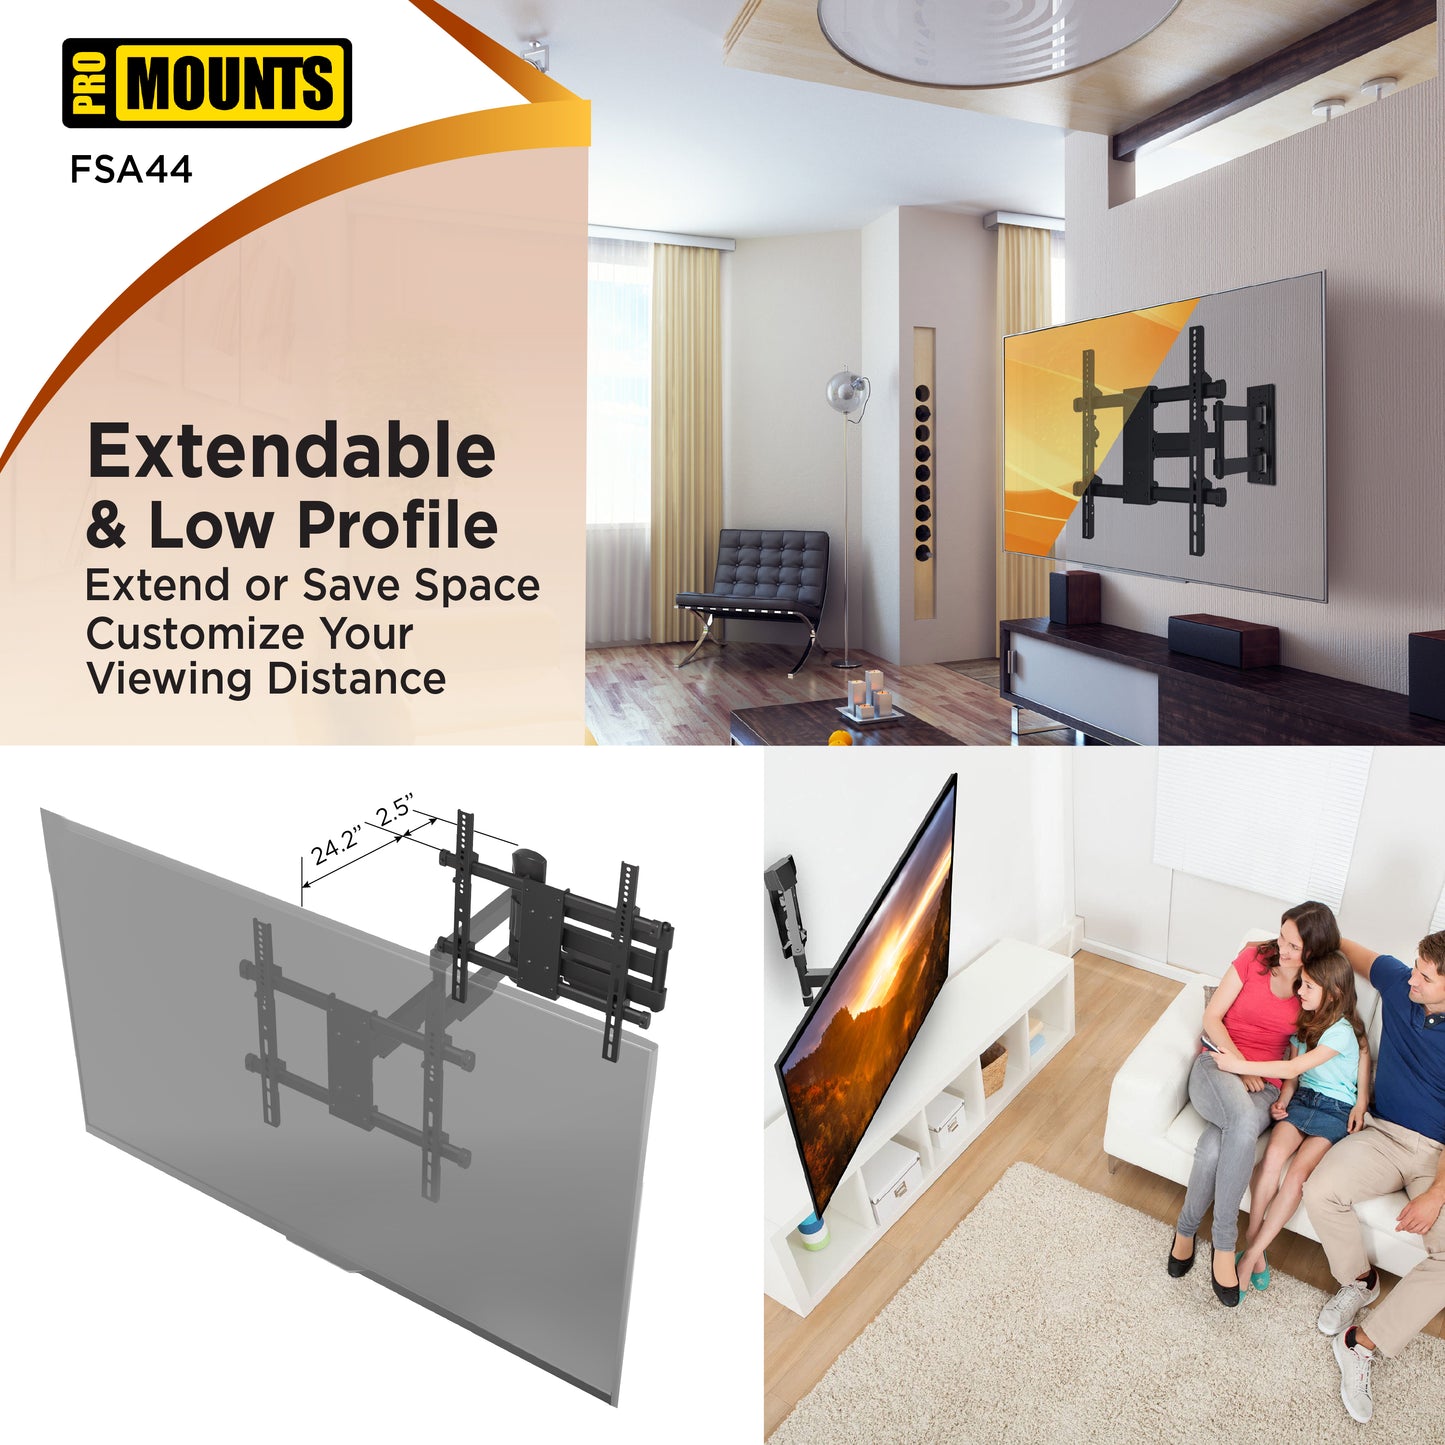 ProMounts Articulating / Full Motion TV Wall Mount for 32" to 65" TVs, Holds up to 80lbs (FSA44)